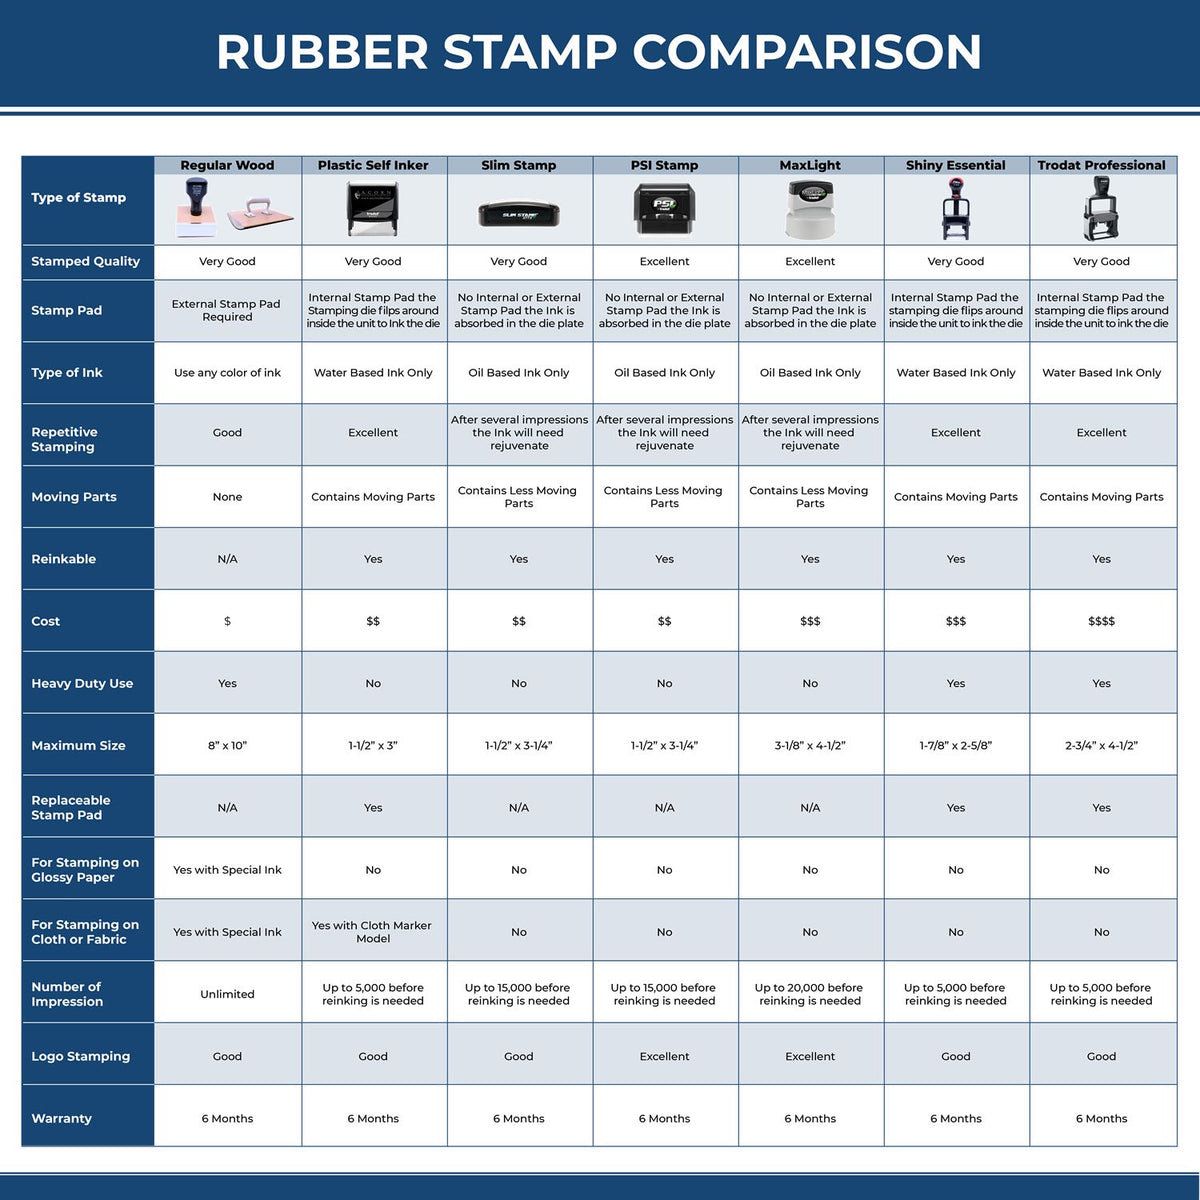 A comparison chart for the different types of mount models available for the Self-Inking Massachusetts PE Stamp.